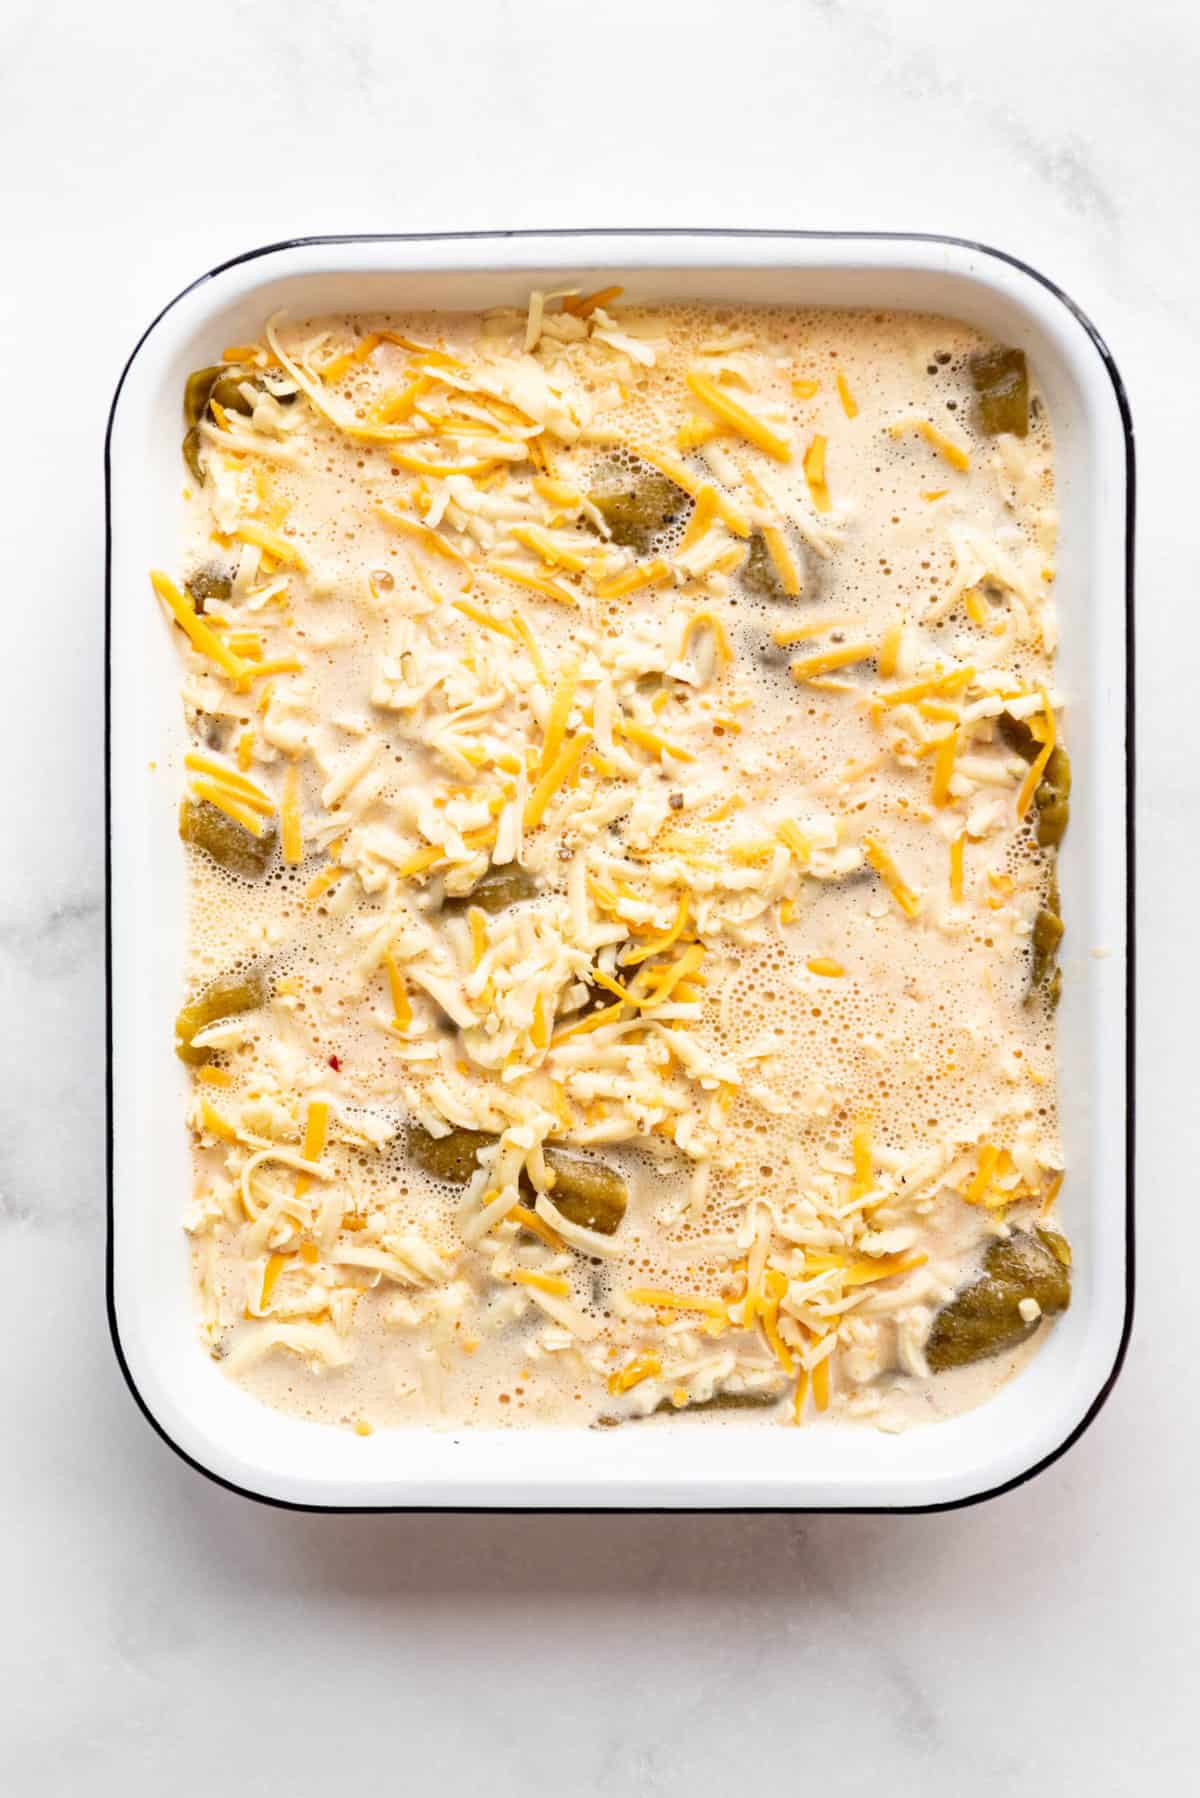 Pouring beaten eggs, milk, and spices over green chiles and cheese in a baking dish.